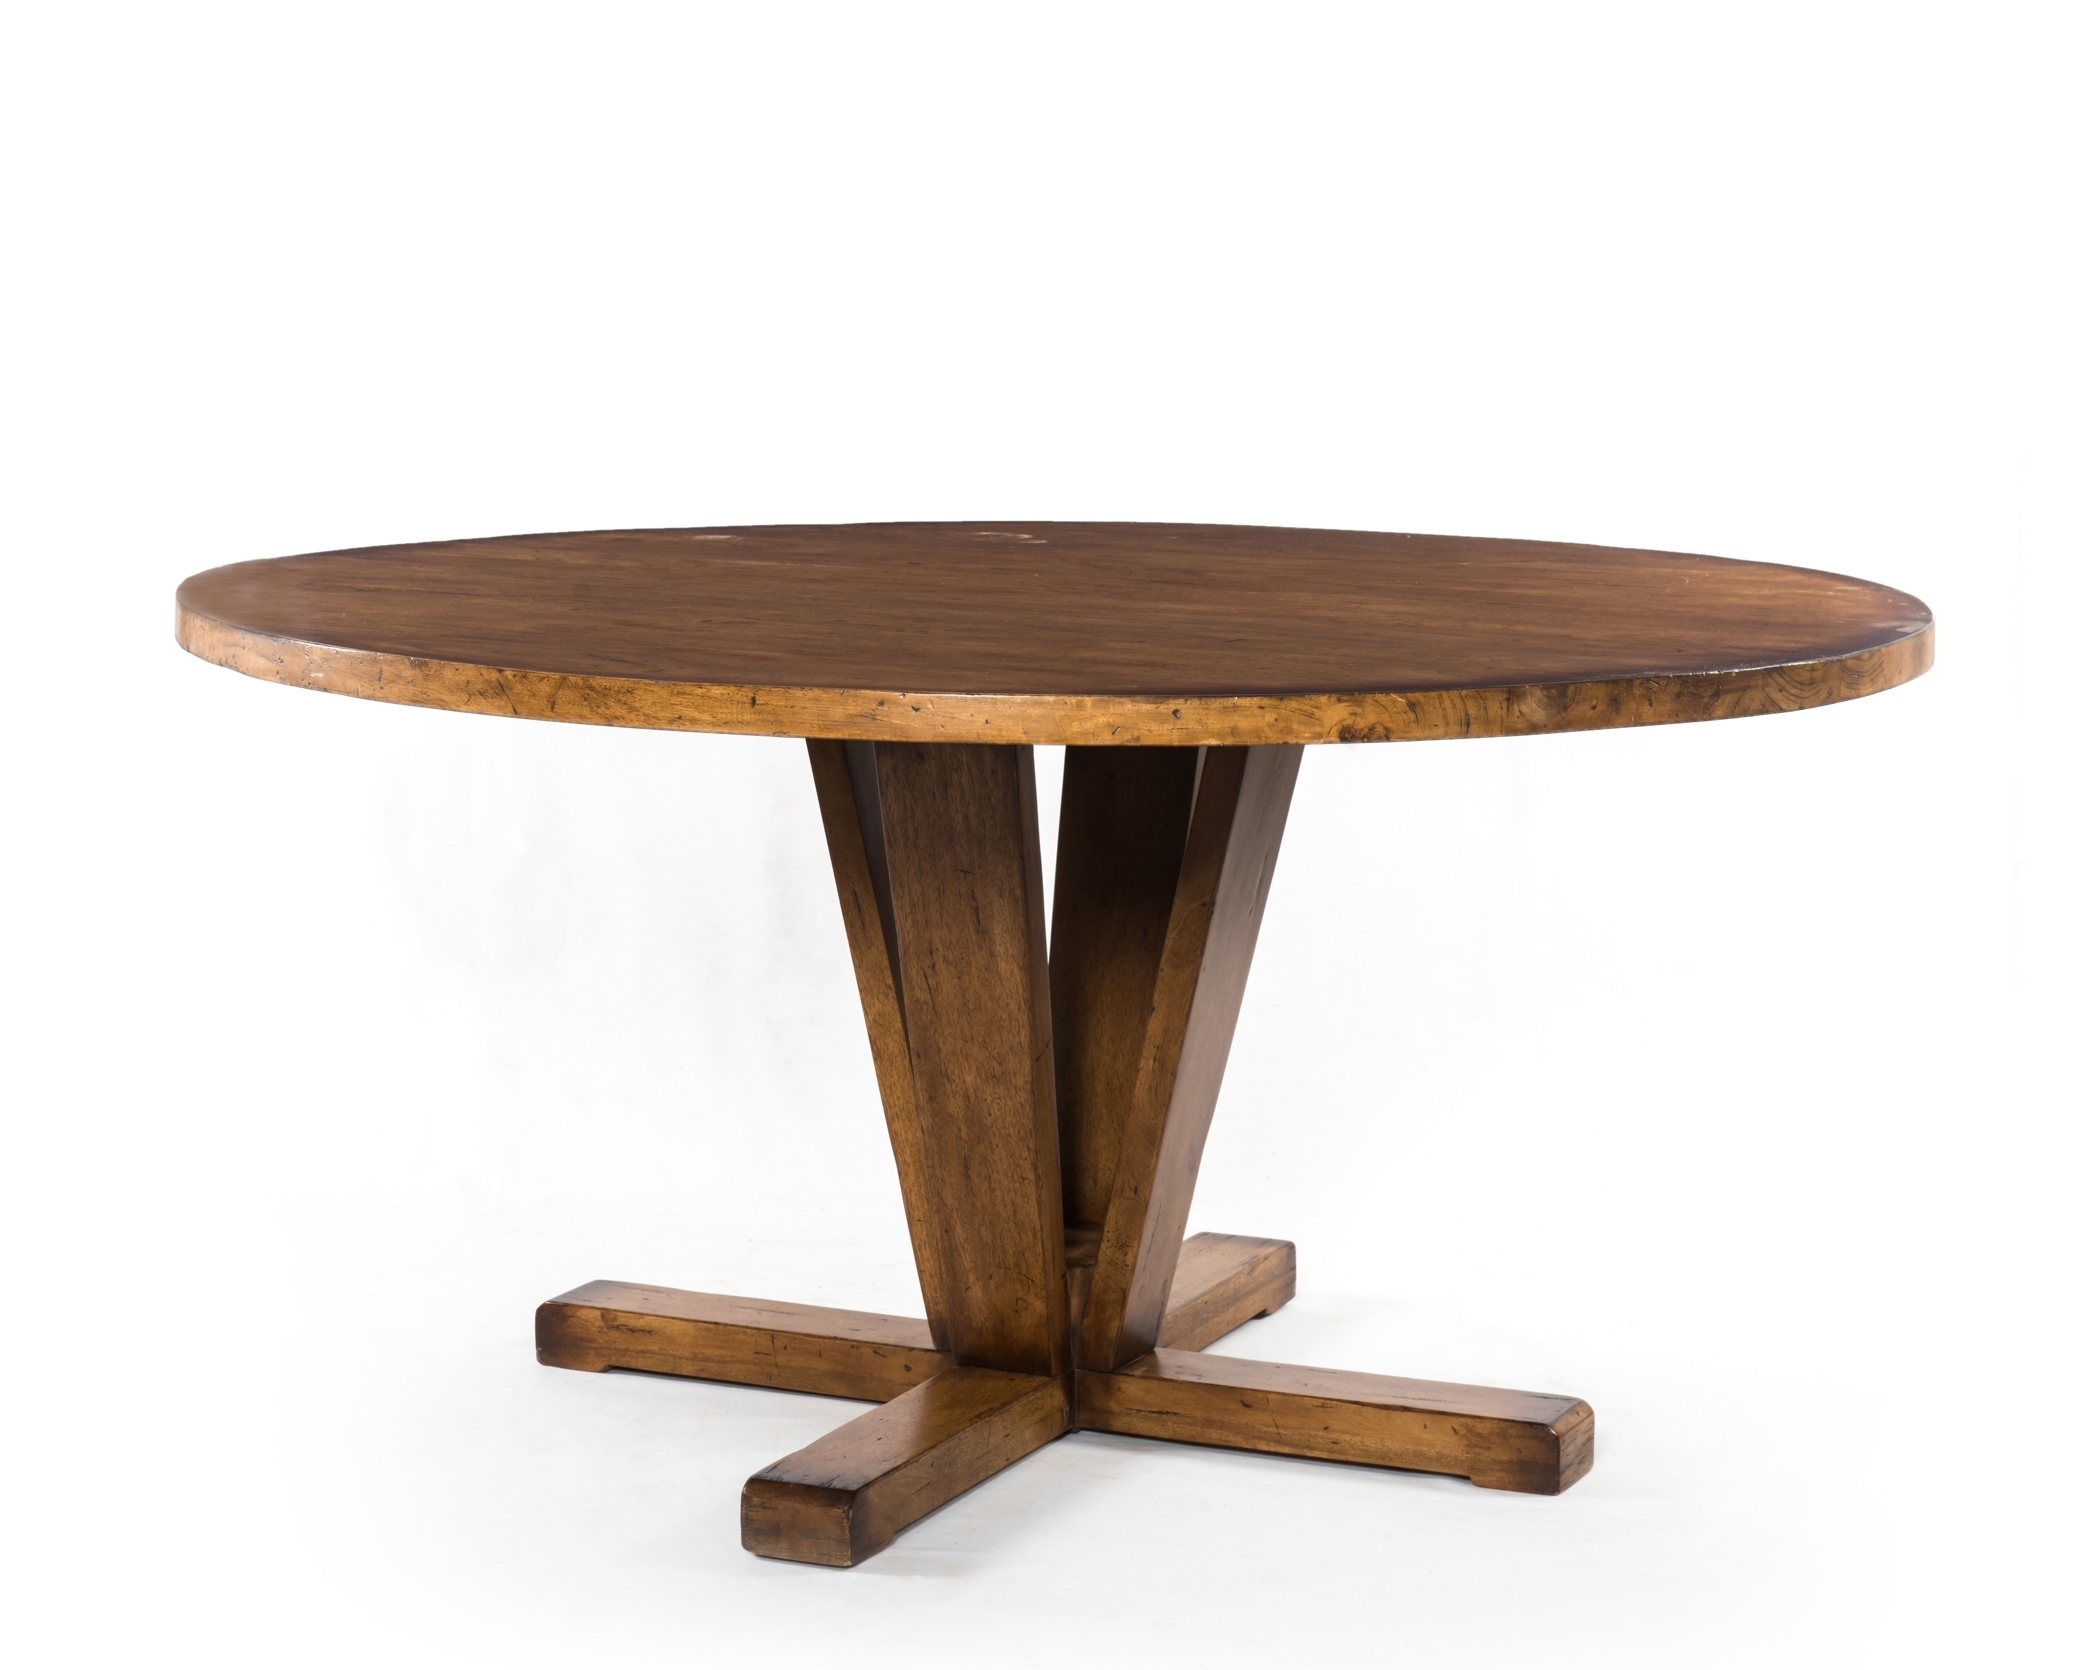 Maleva Round Dining Table, Reclaimed Wood - Image 0